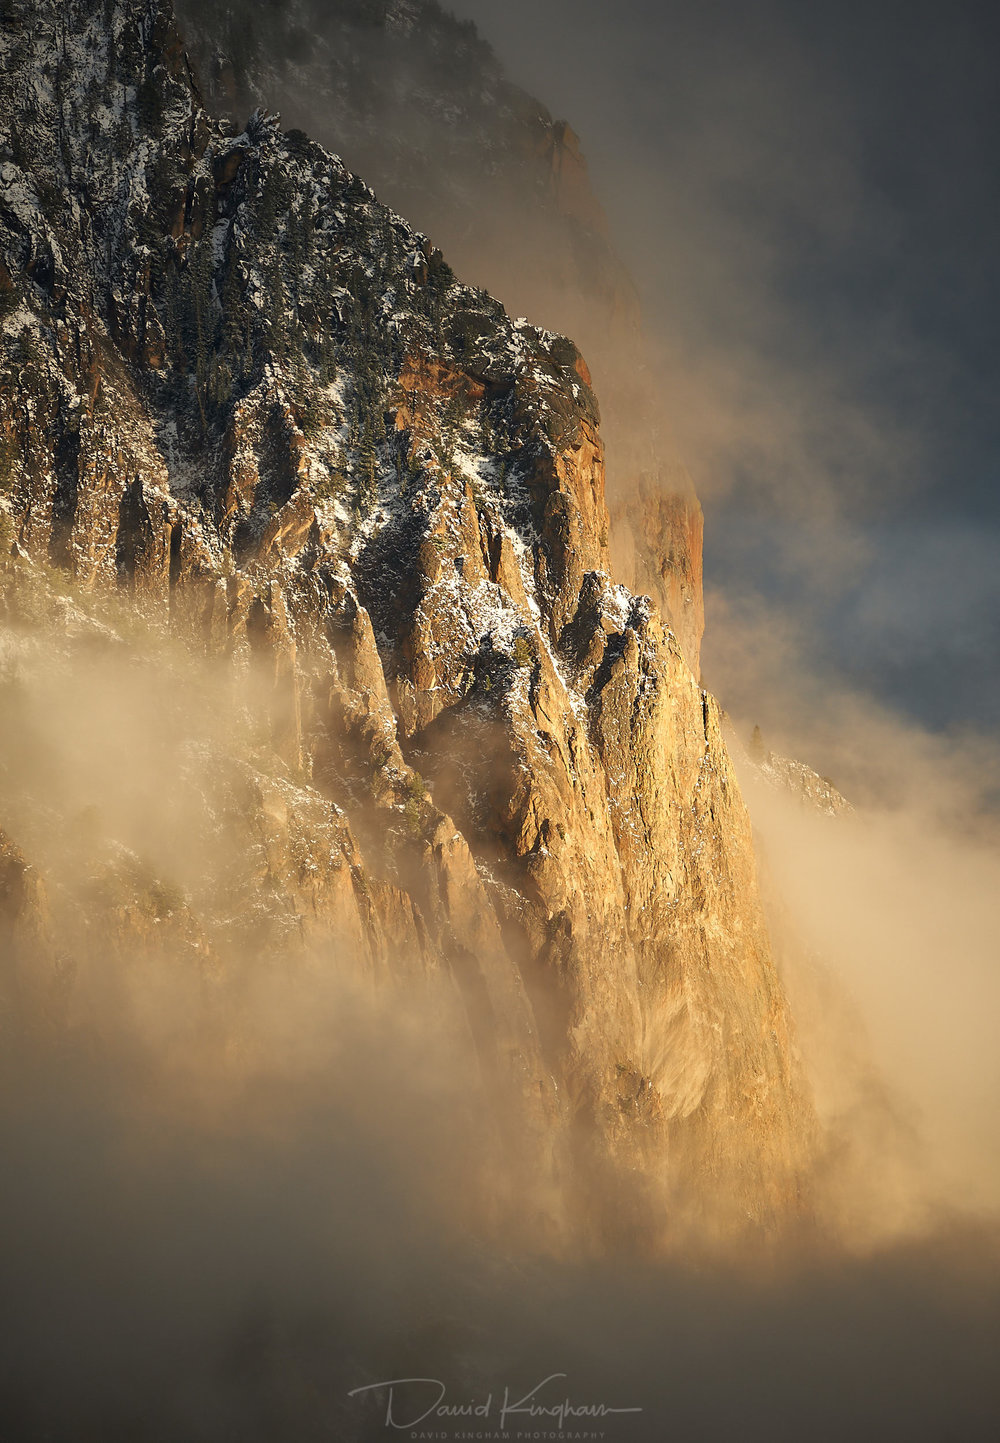 David Kingham - Fujifilm 100-400 @ 347mm (Equivalent focal length of 520mm), ISO 200, f/5.6, 1/420s Composition - Contrast between cold, cloud shrouded mountain with the warm light of sunset